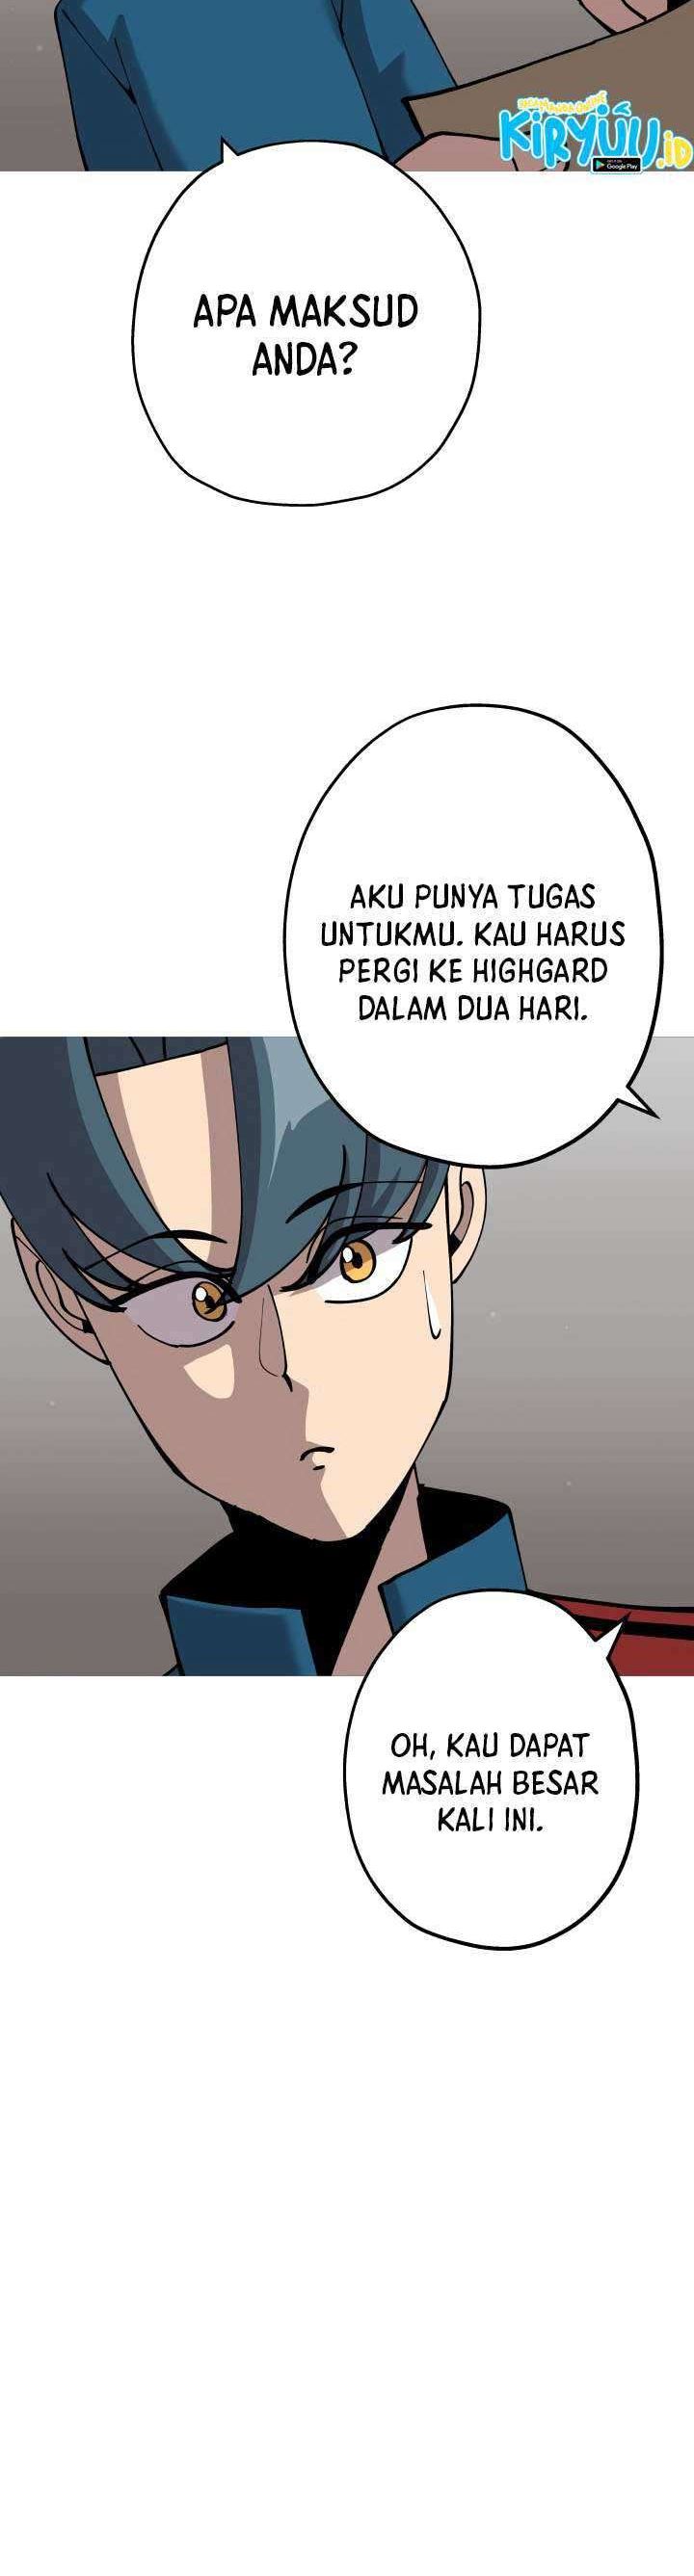 Dilarang COPAS - situs resmi www.mangacanblog.com - Komik the story of a low rank soldier becoming a monarch 029 - chapter 29 30 Indonesia the story of a low rank soldier becoming a monarch 029 - chapter 29 Terbaru 15|Baca Manga Komik Indonesia|Mangacan